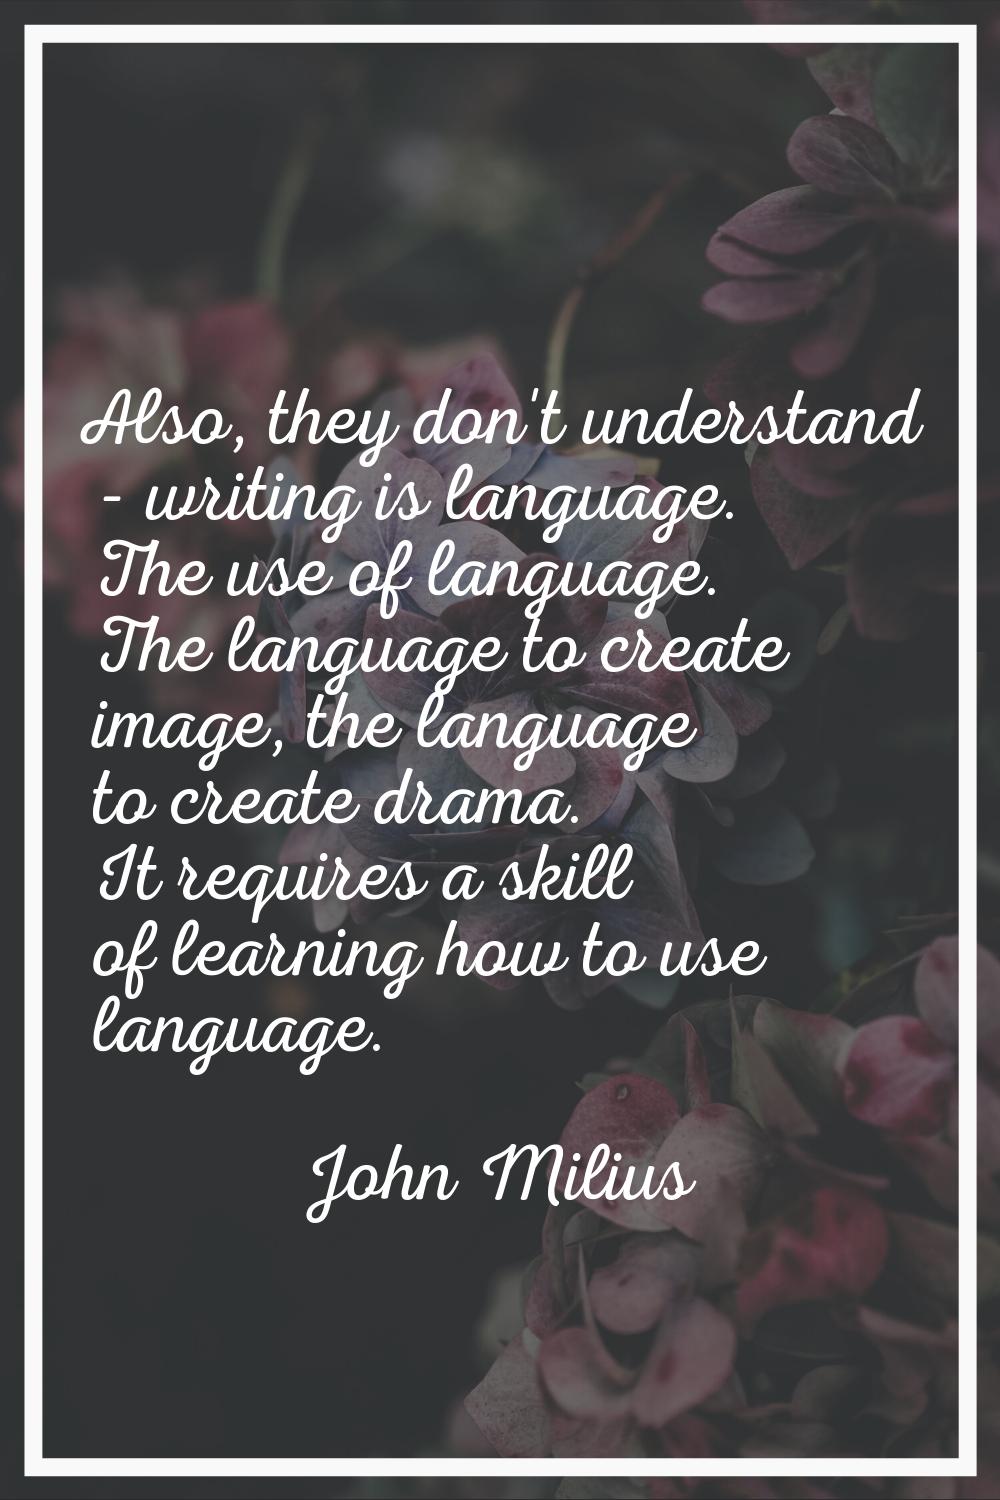 Also, they don't understand - writing is language. The use of language. The language to create imag